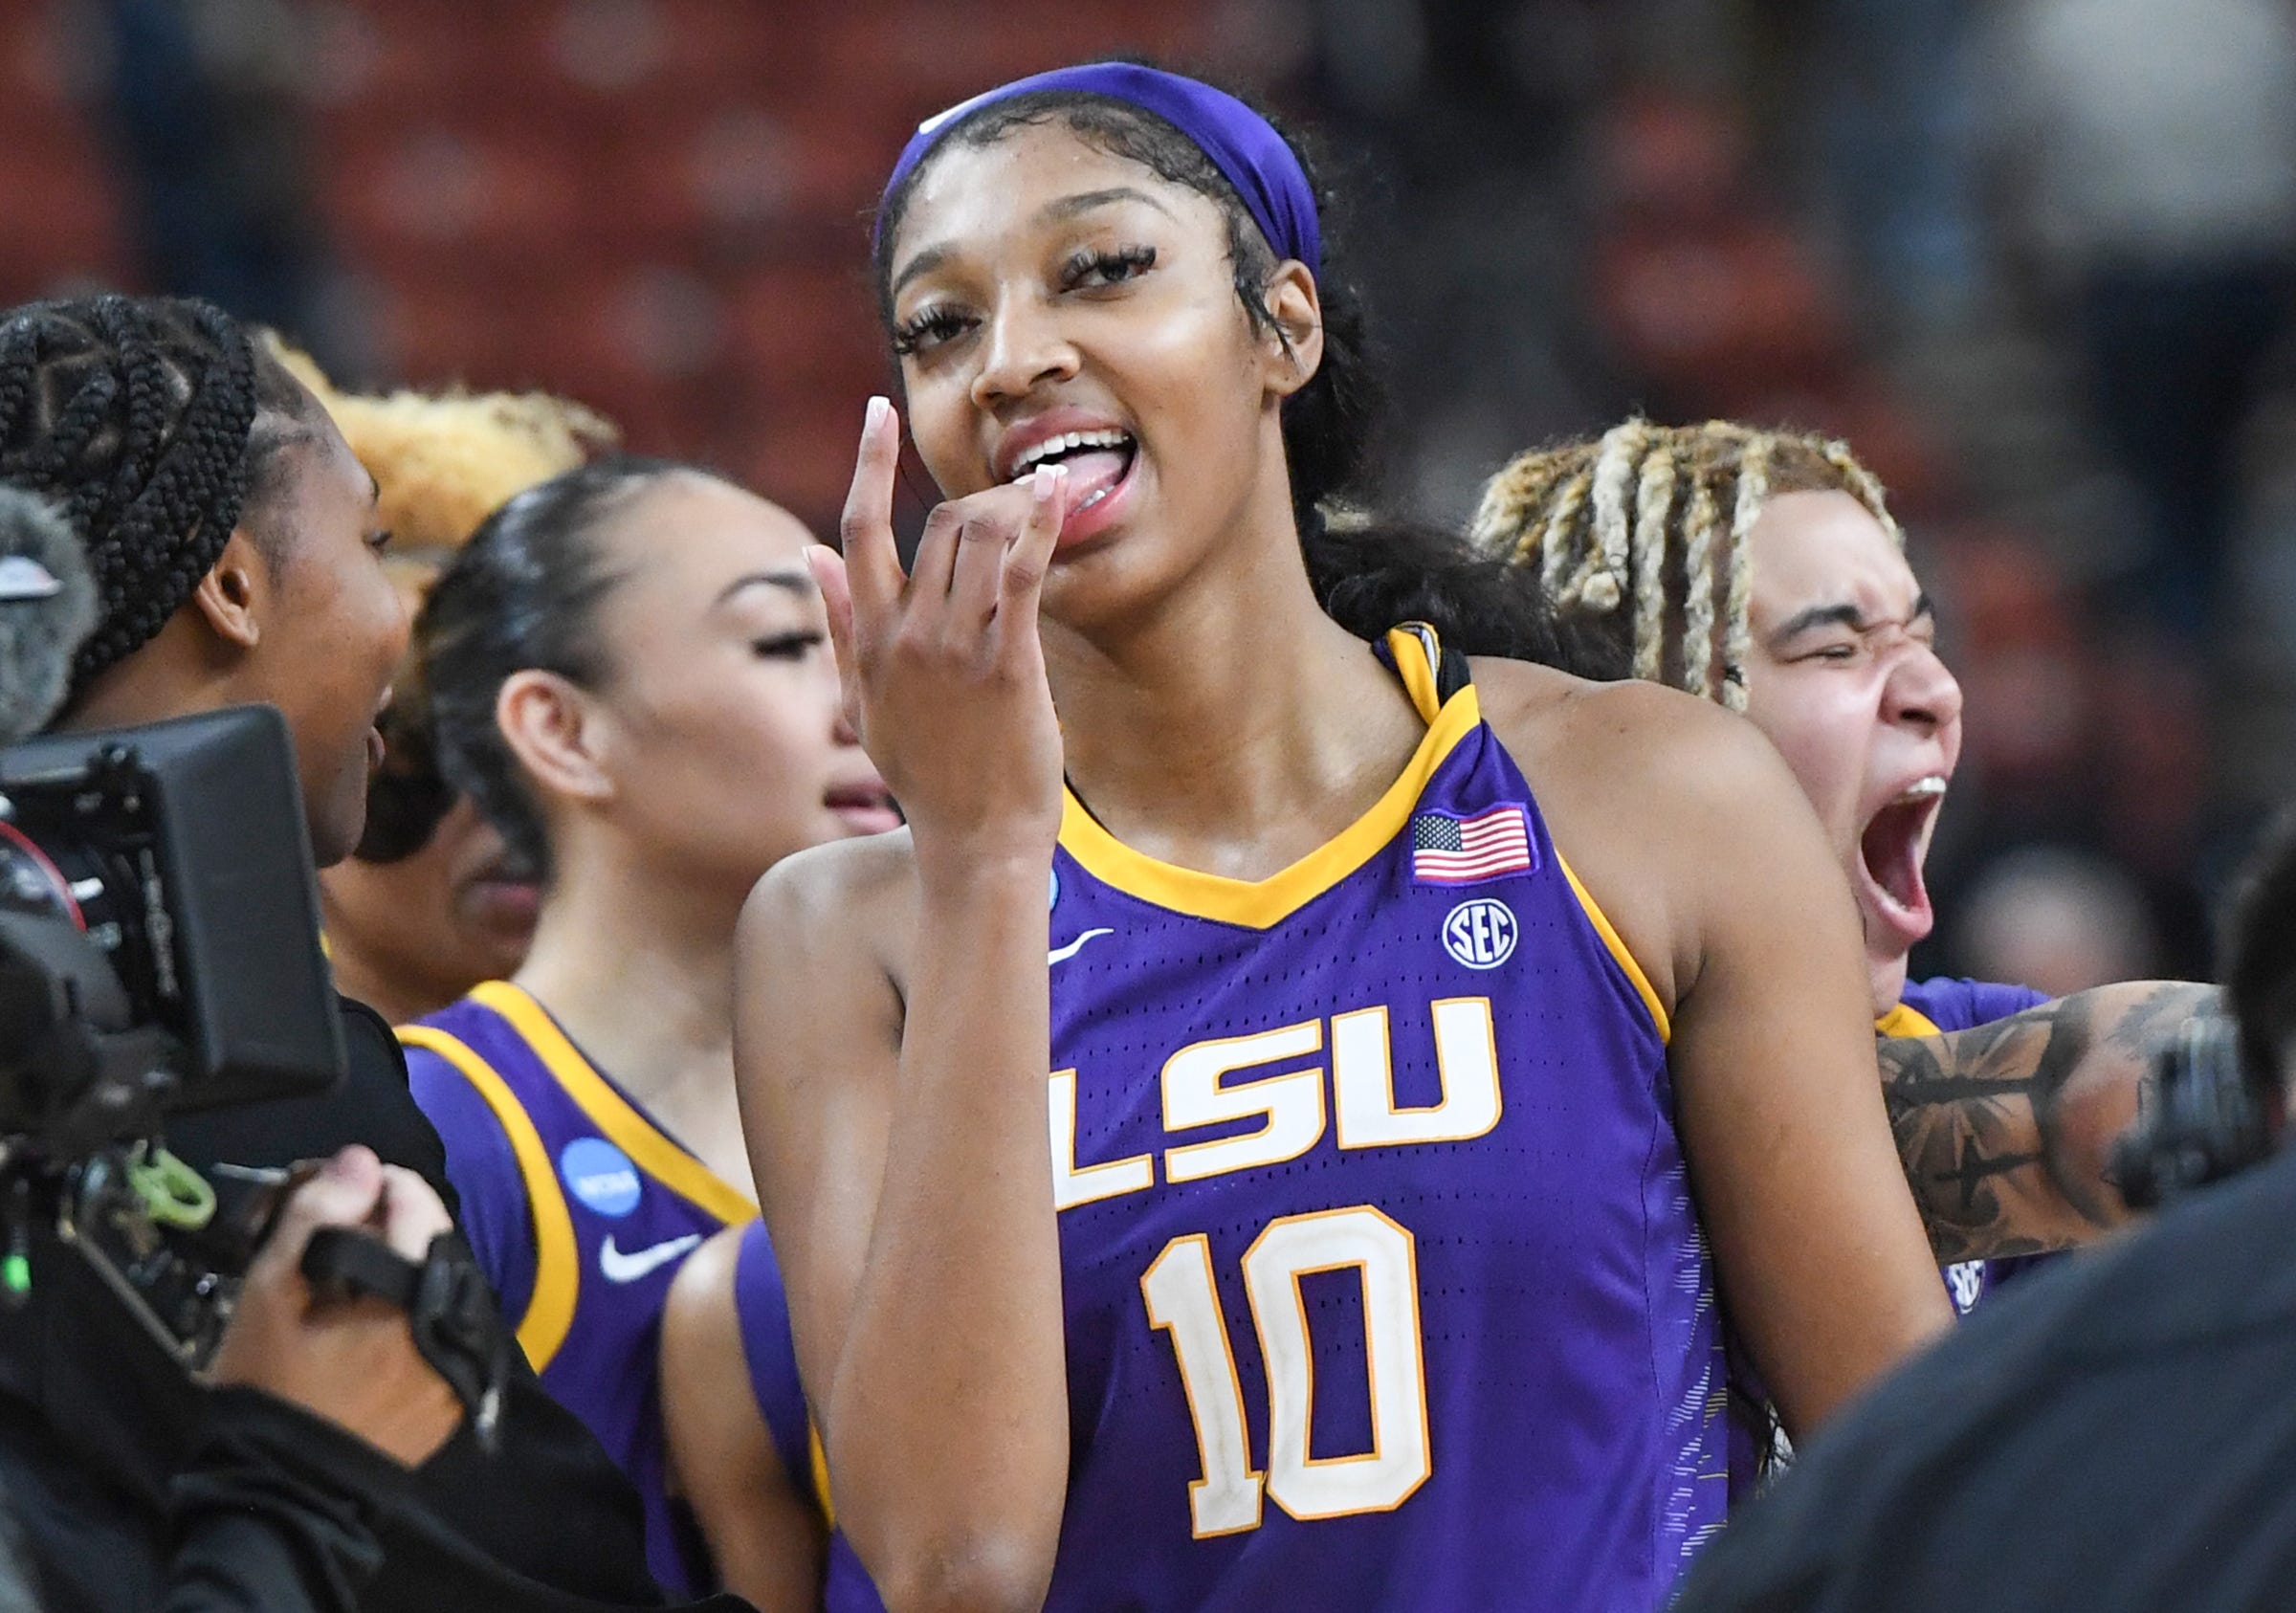 Louisiana State University forward Angel Reese (10),  celebrates with teammates after the 66-63 win over Utah in the Sweet 16 round of the NCAA Women's Tournament at Bon Secours Wellness Arena in Greenville, S.C. Friday, March 24, 2023.